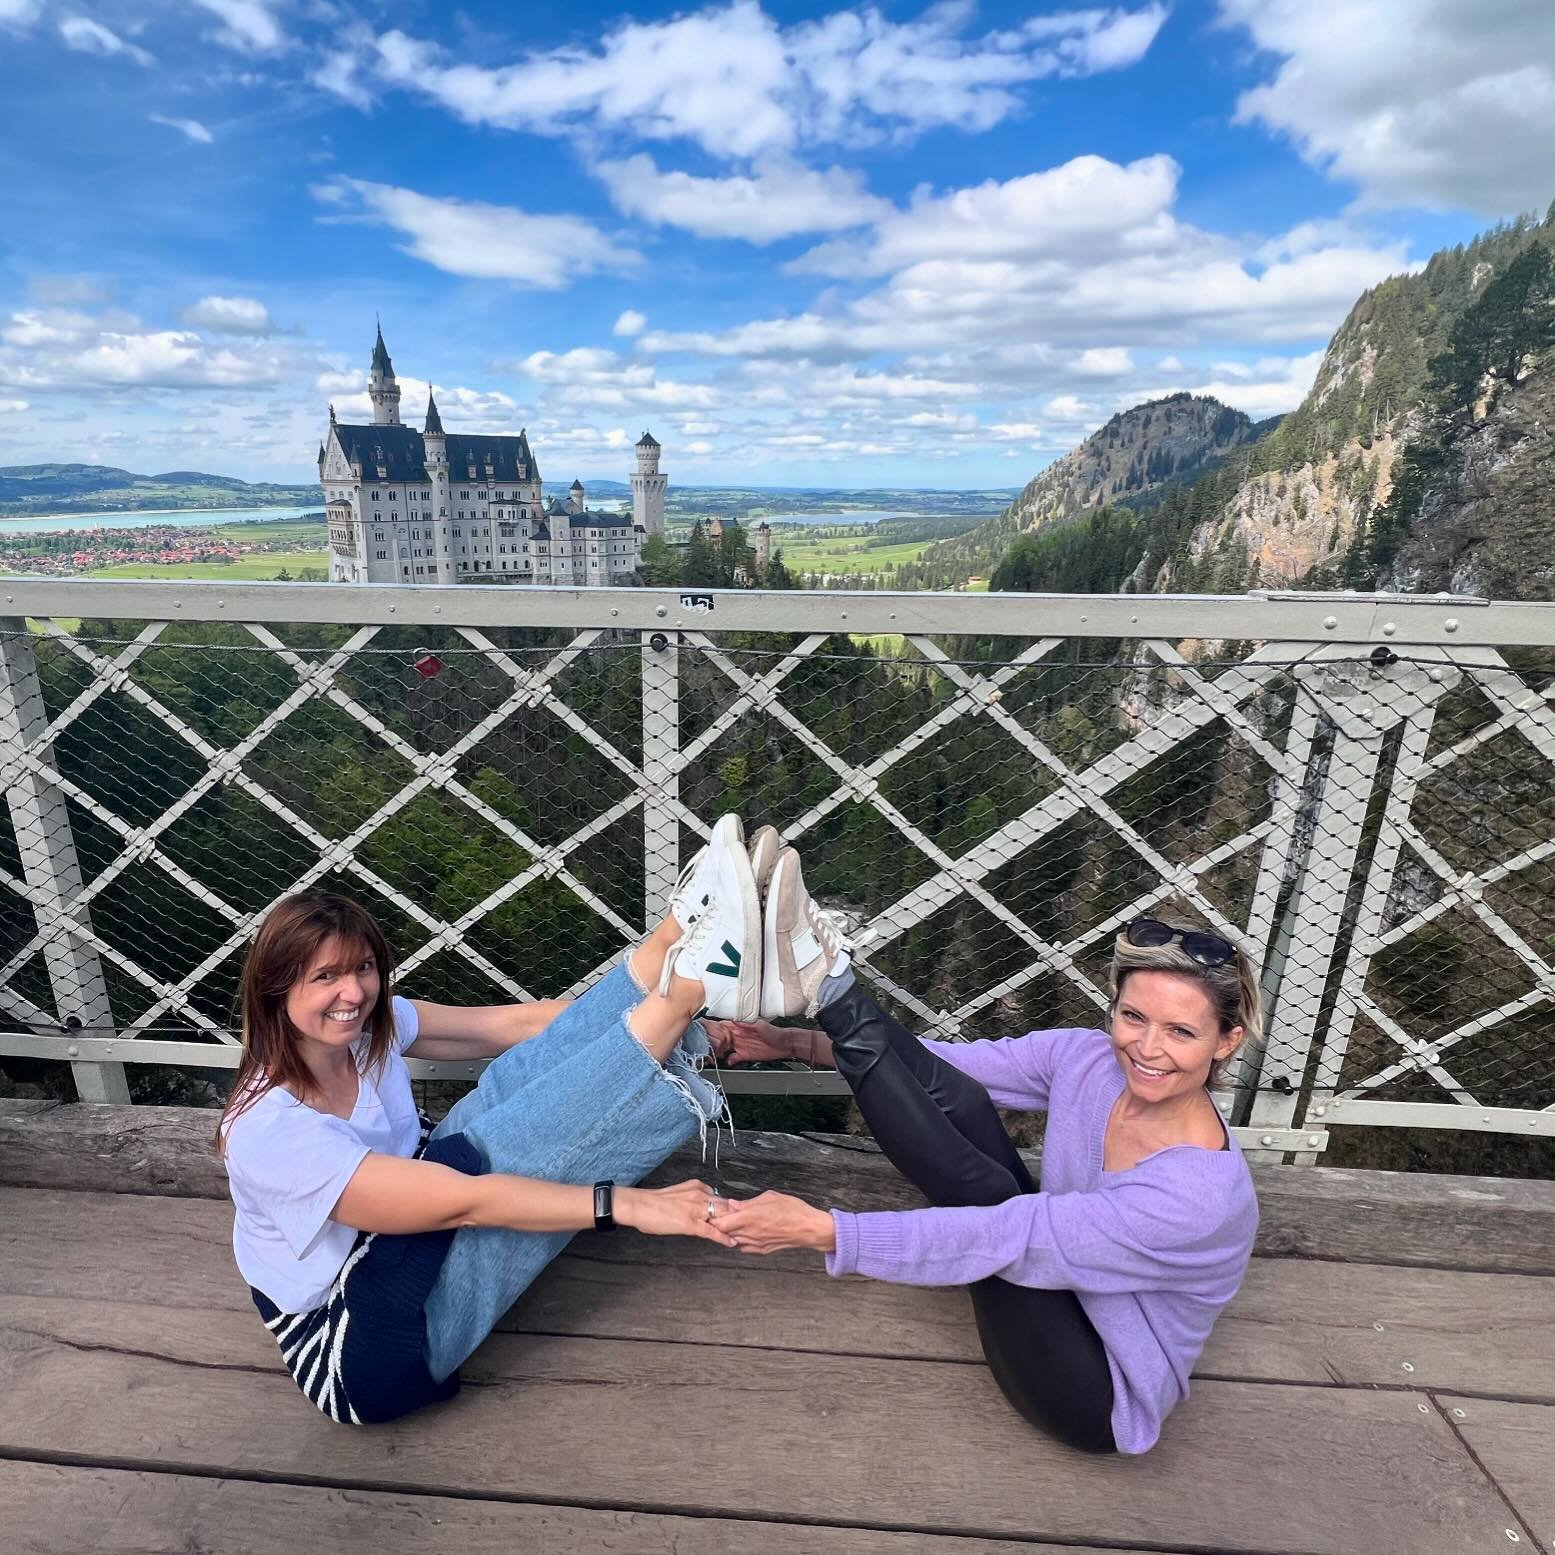 It&rsquo;s a special #internationalpilatesday for me as I&rsquo;m in Germany, and with my dear friend @jennywinkelmannfit who I met through Pilates. We may have caused a major tourist traffic jam but doing a teaser with the Neuschwanstein Castle in t